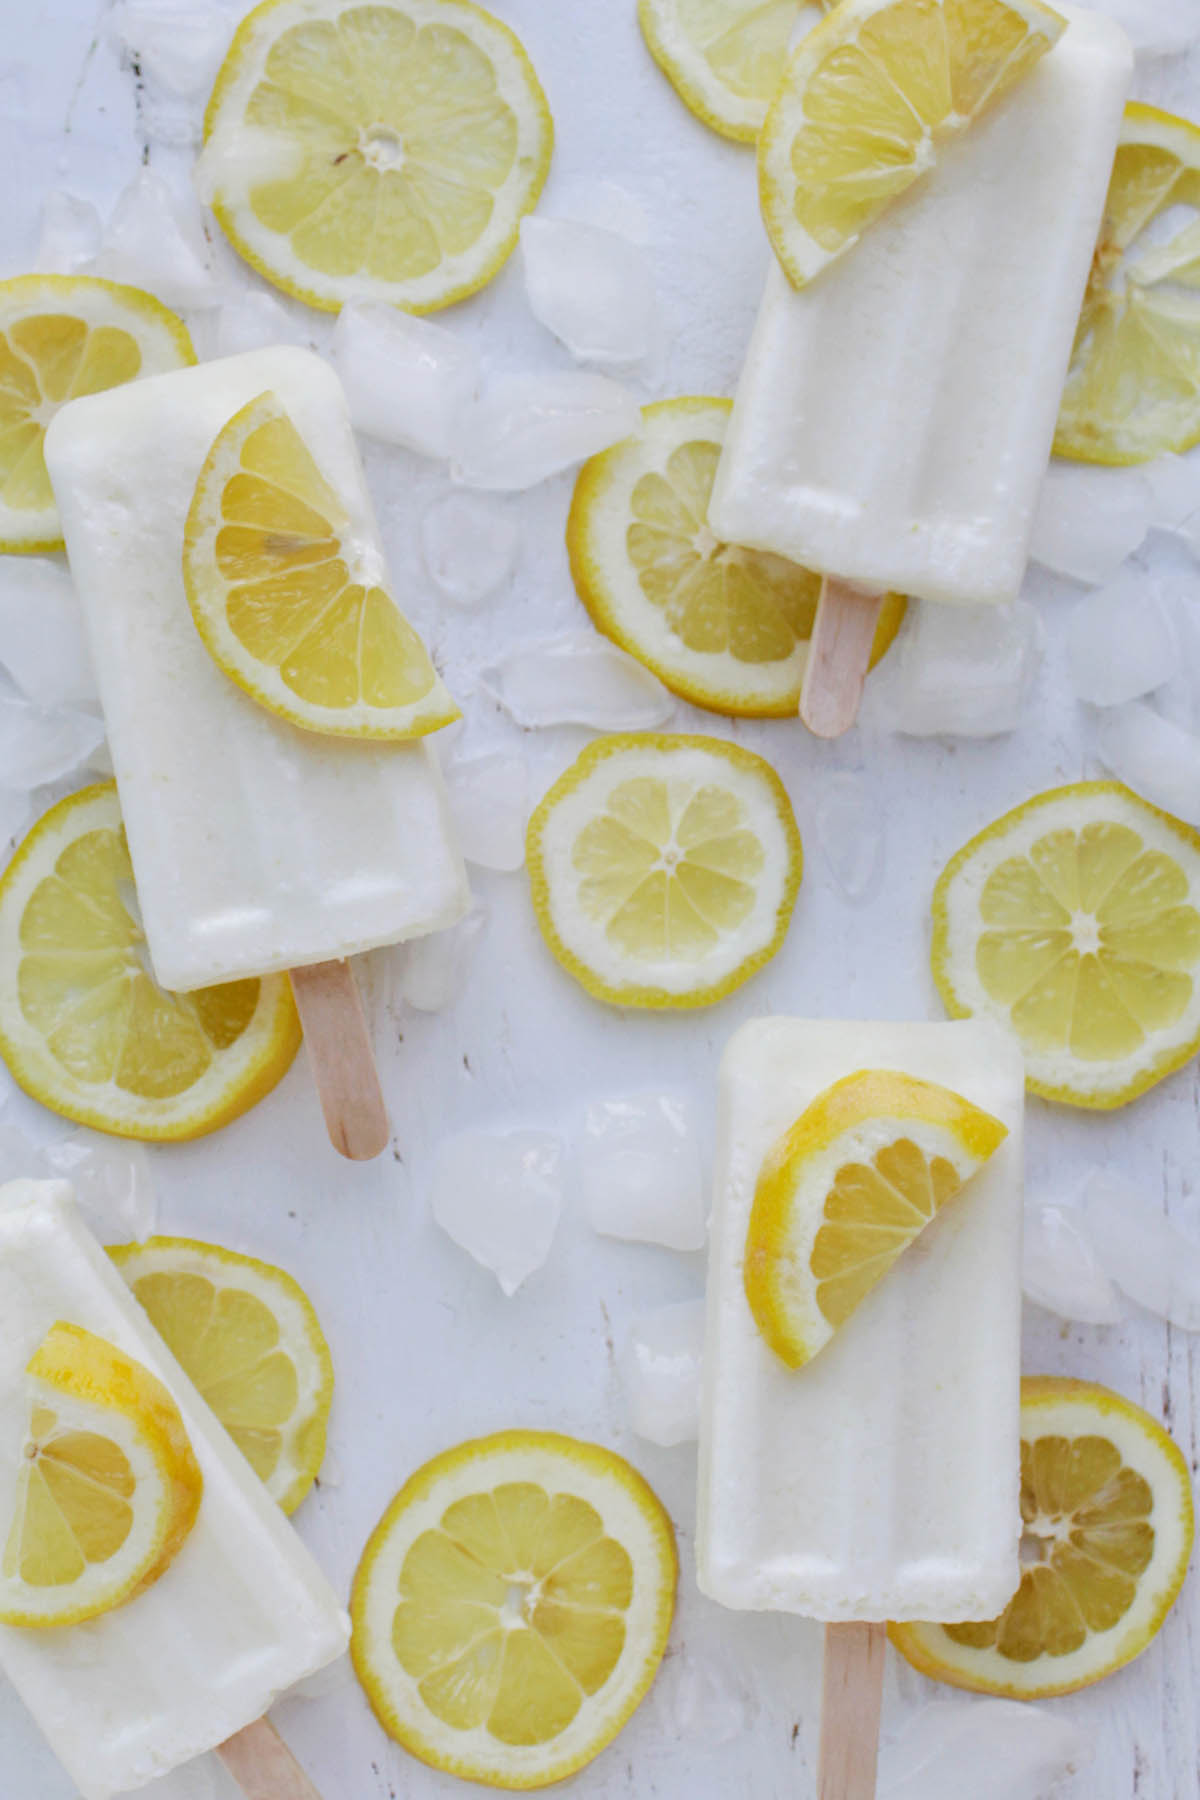 four lemon popsicles laying on ice and lemon slices.